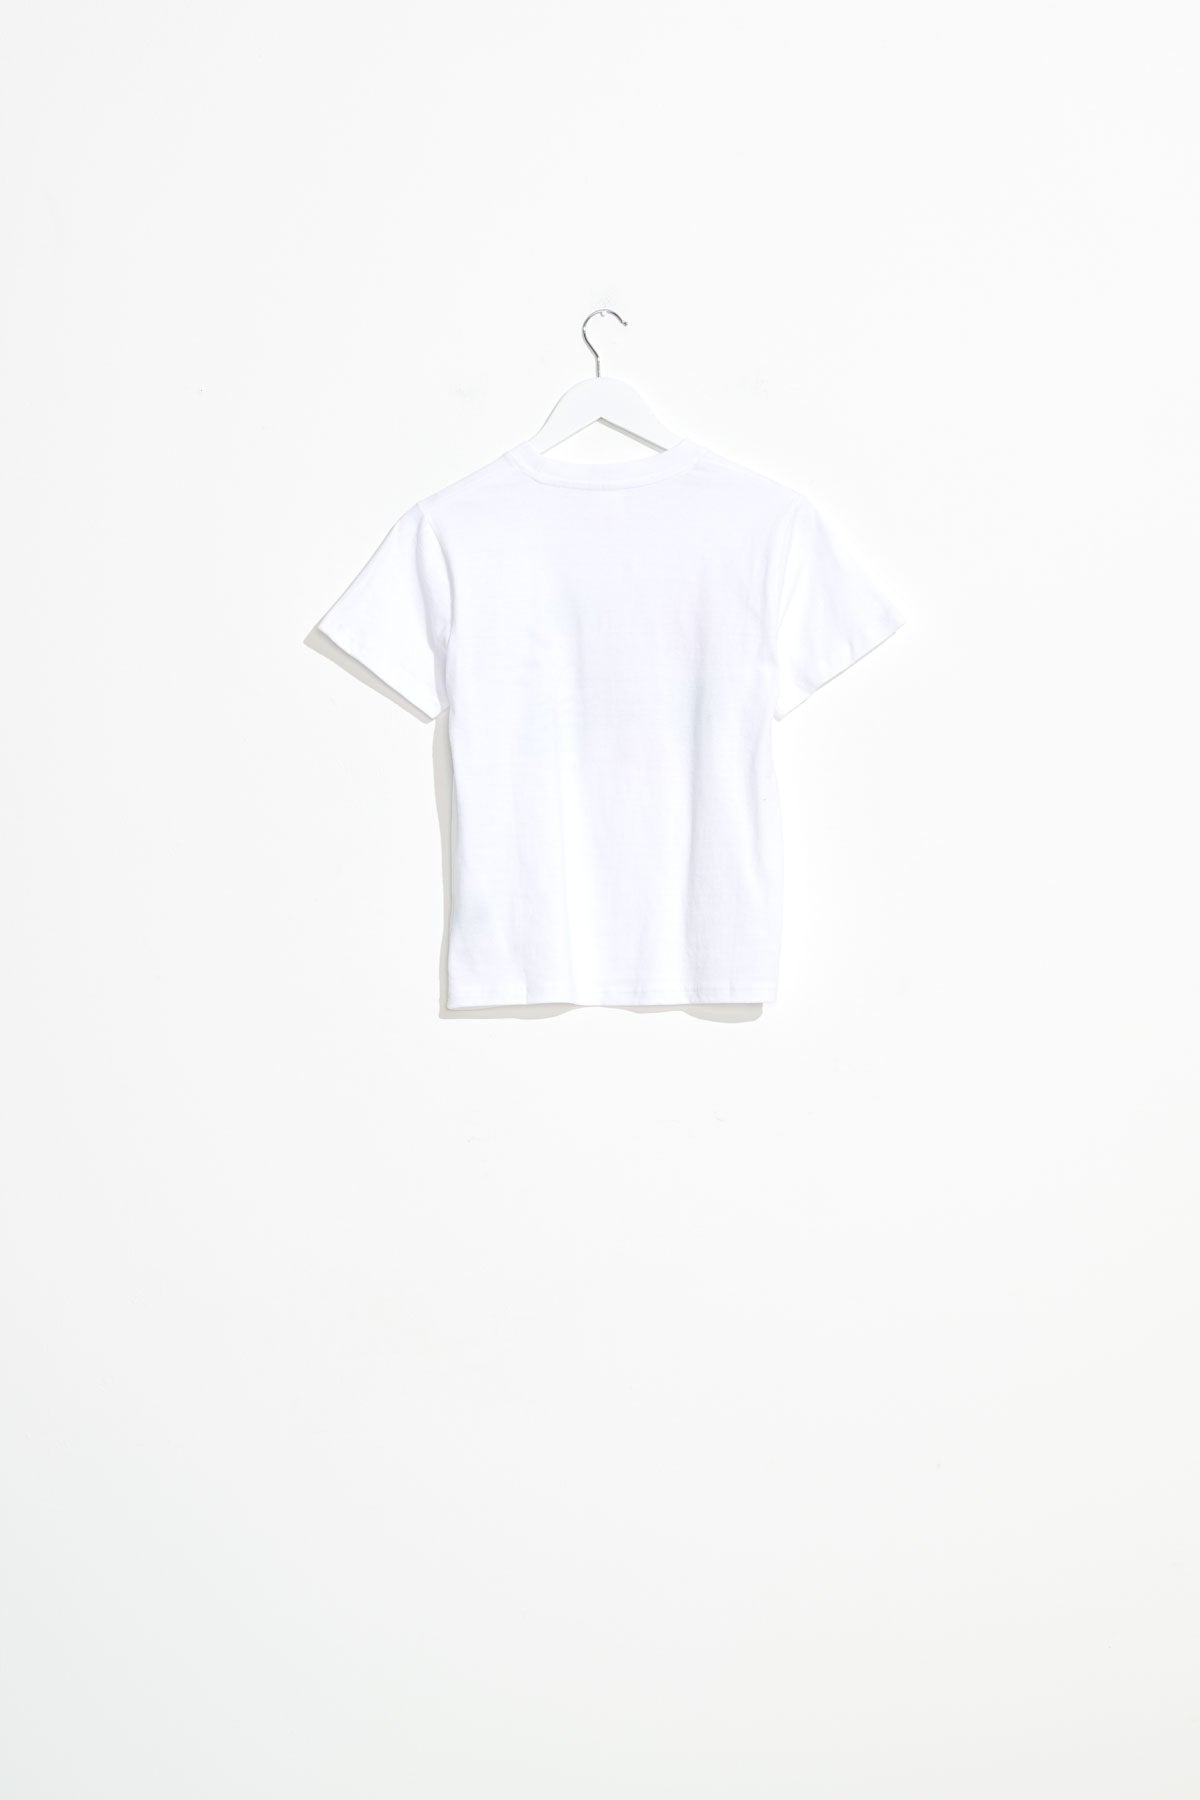 Misfit Shapes - Aries Sun Baby Tee - White